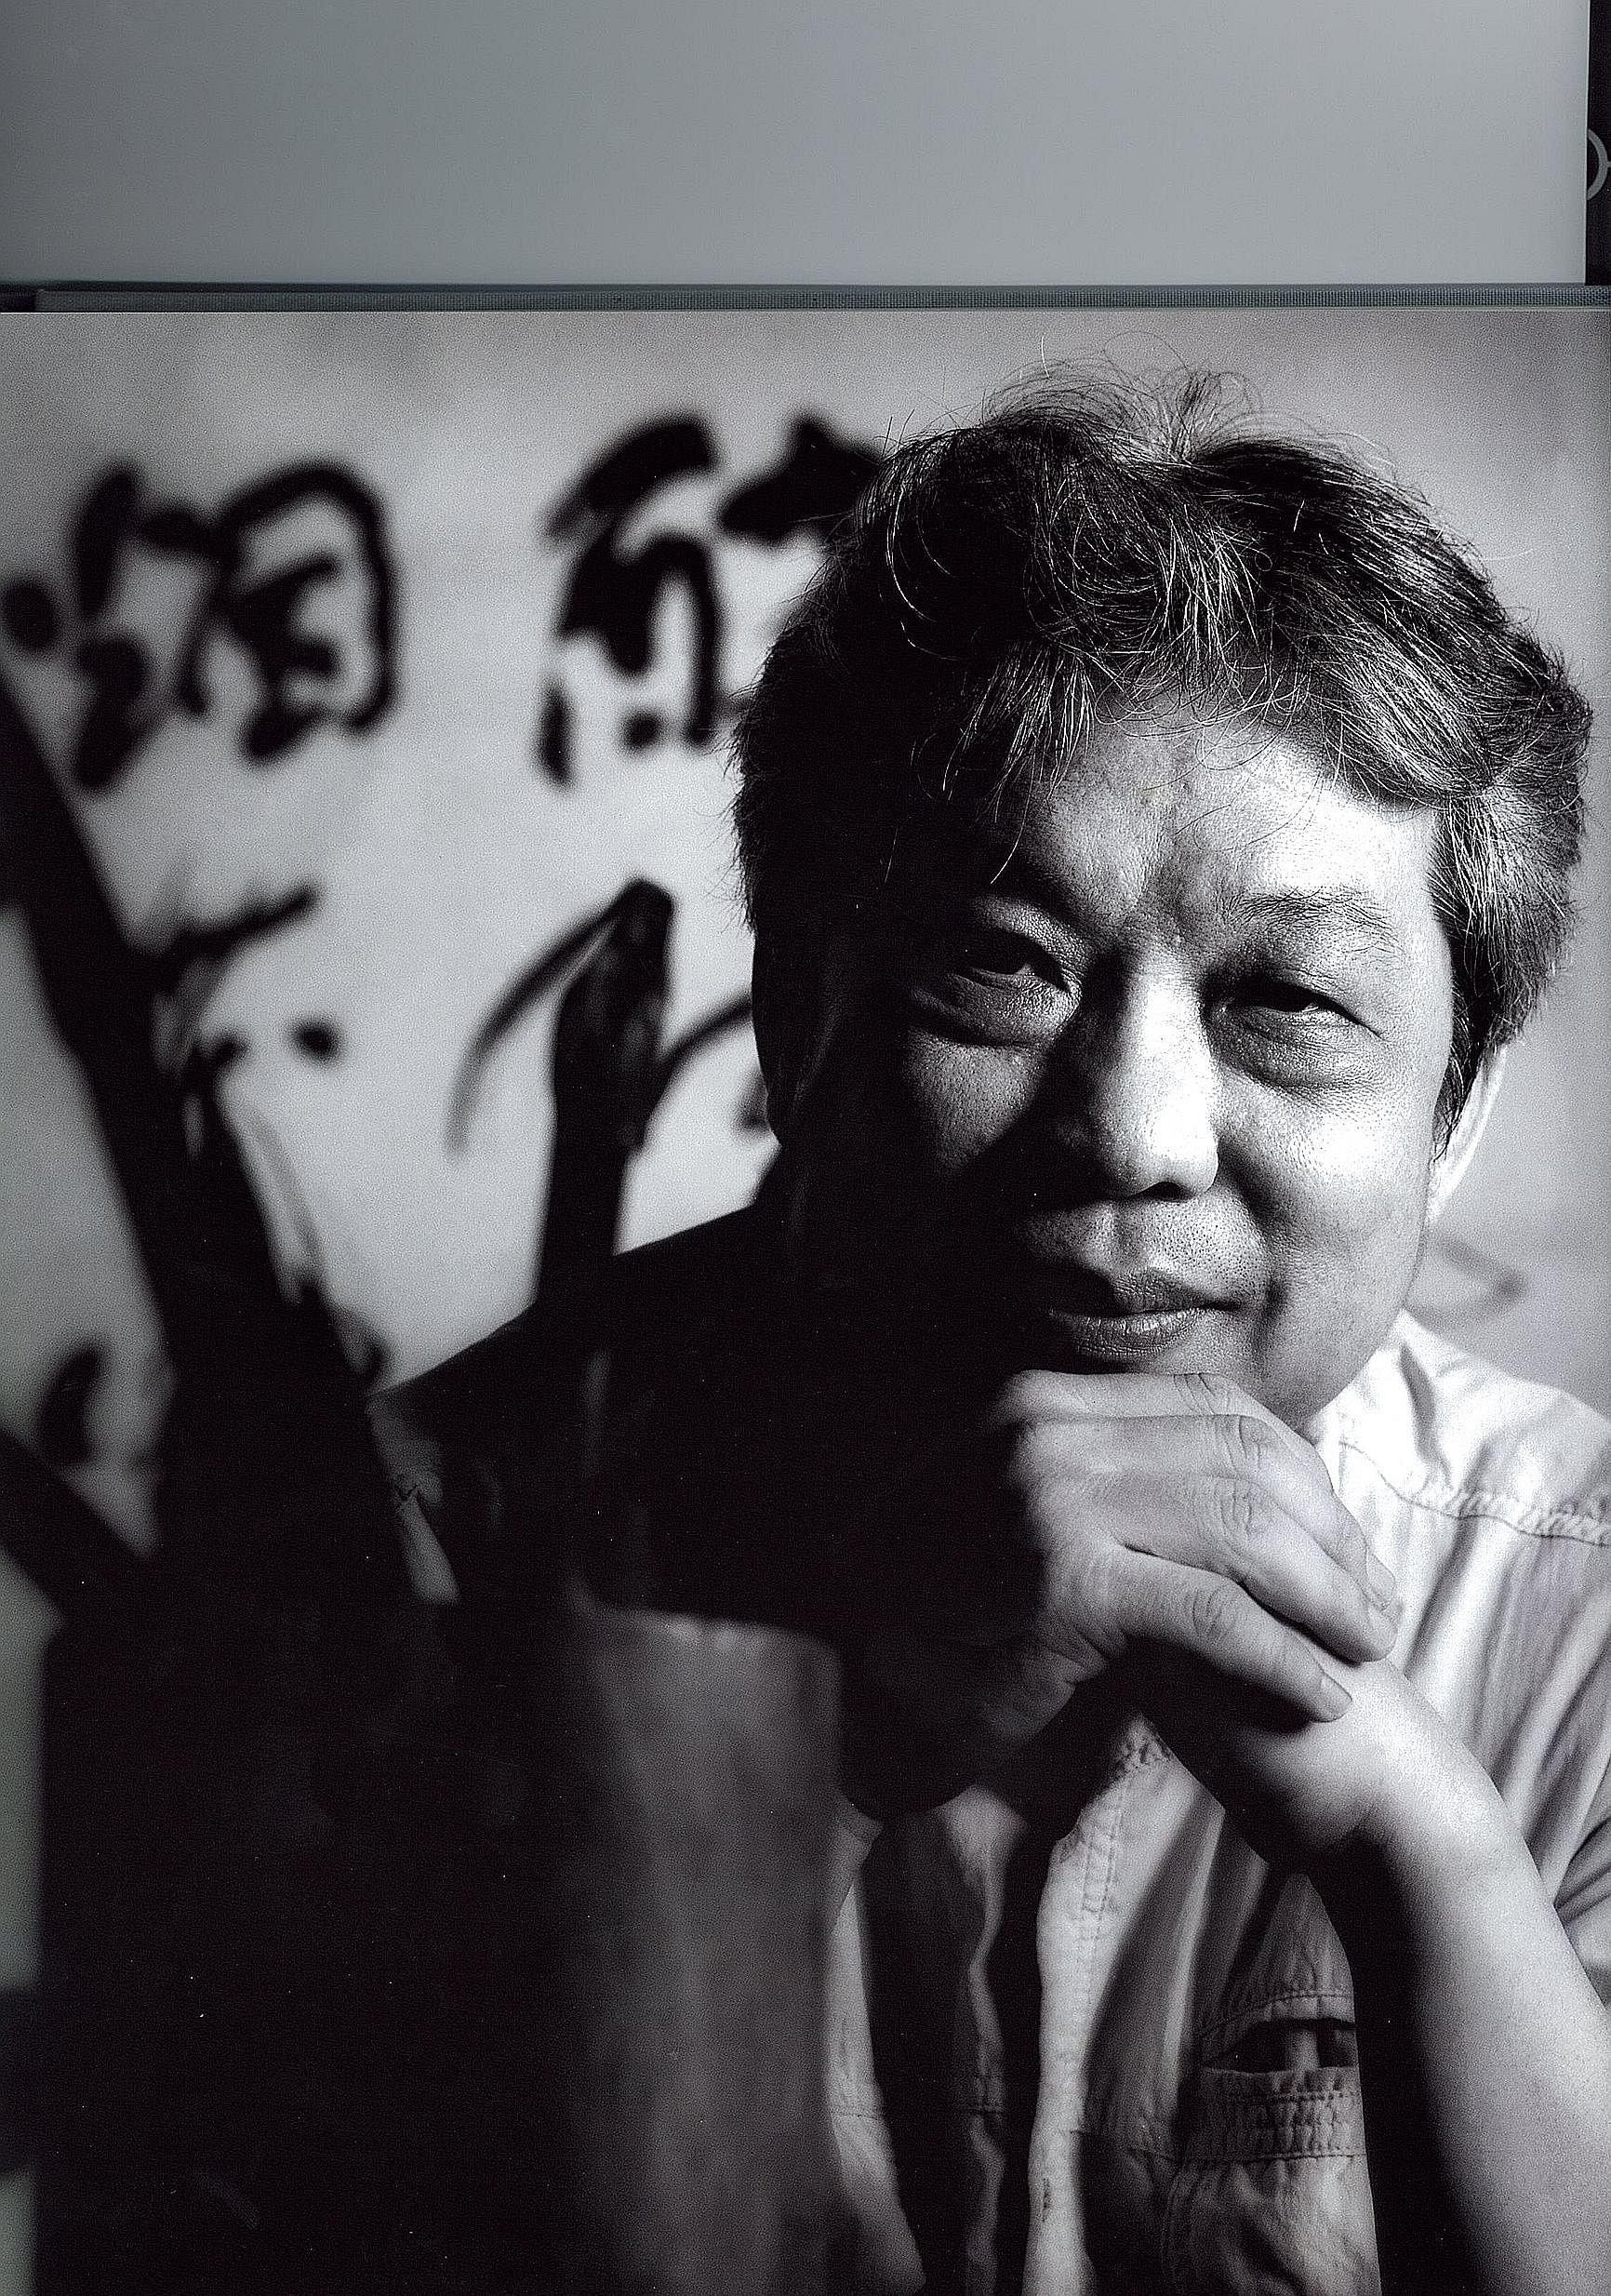 See the works of the late artist, Chua Ek Kay (above), at the National Gallery Singapore.